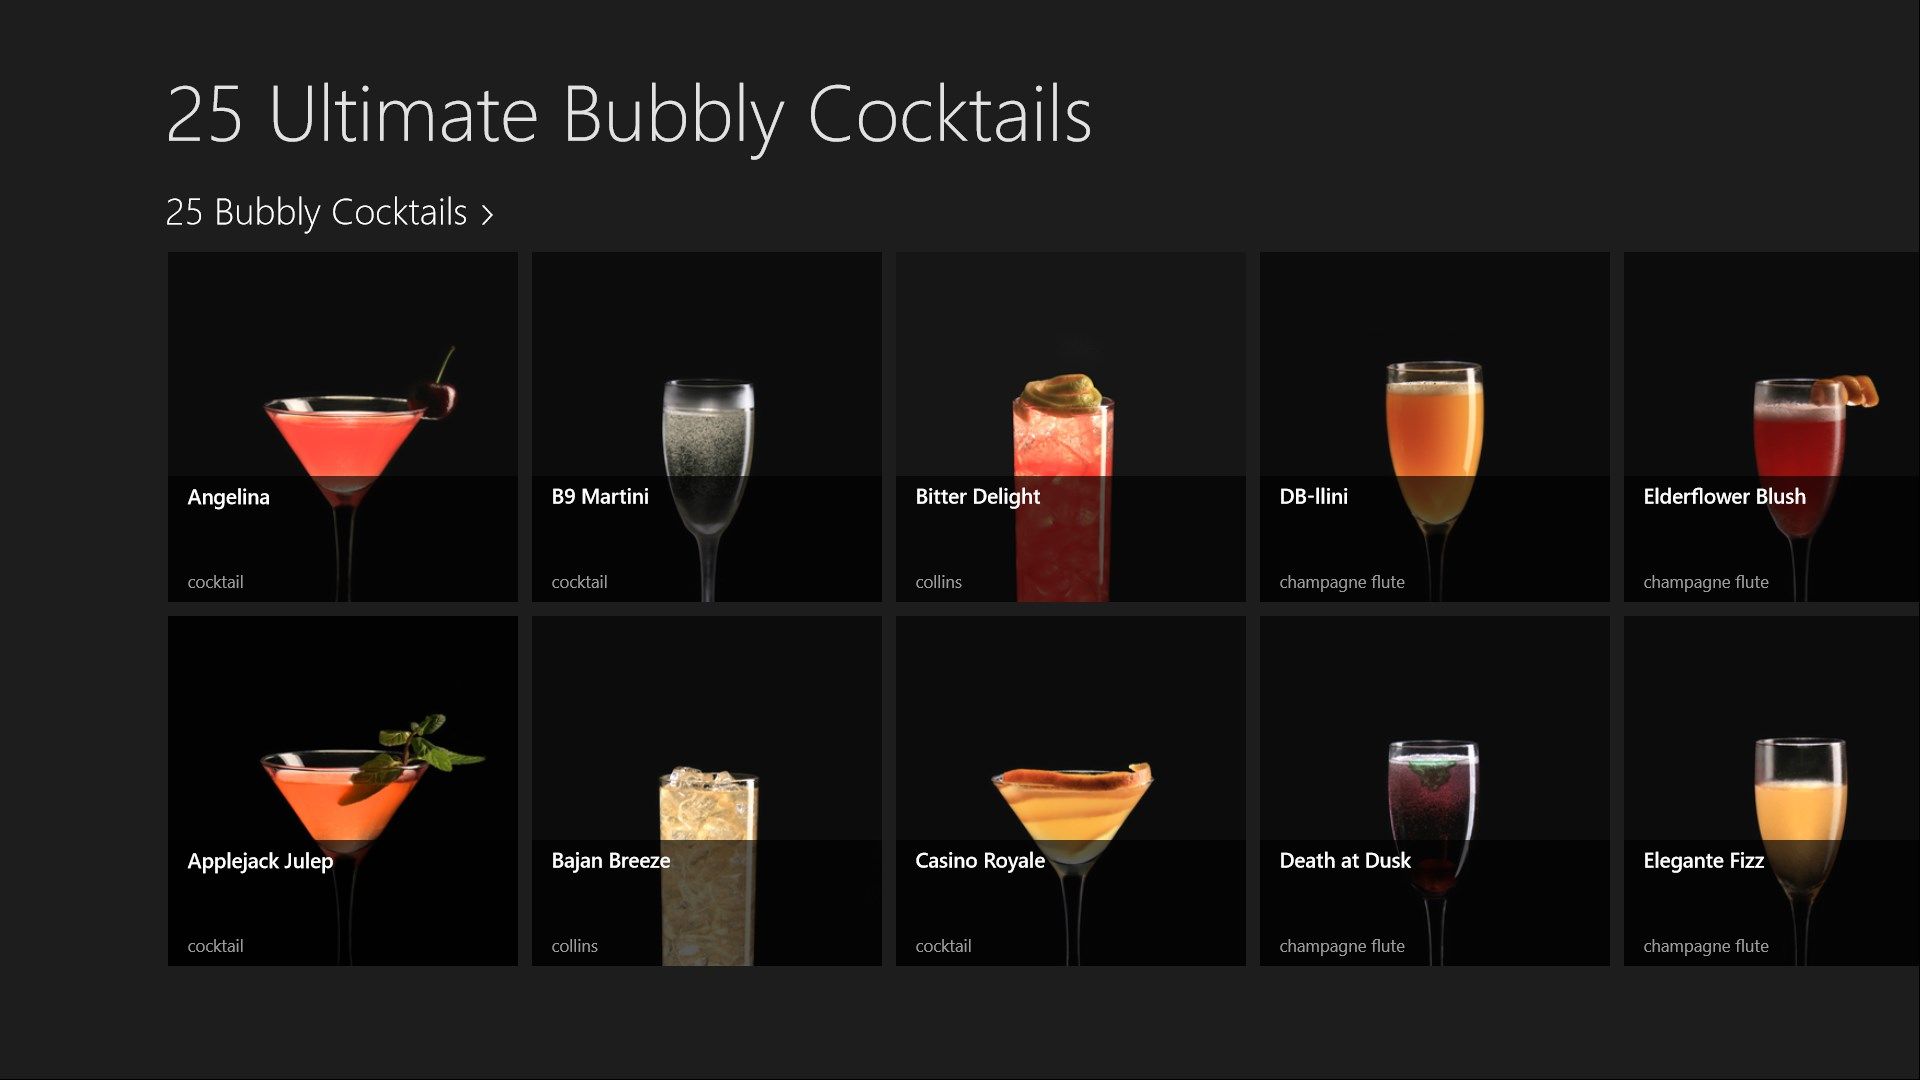 Select from the cocktail images